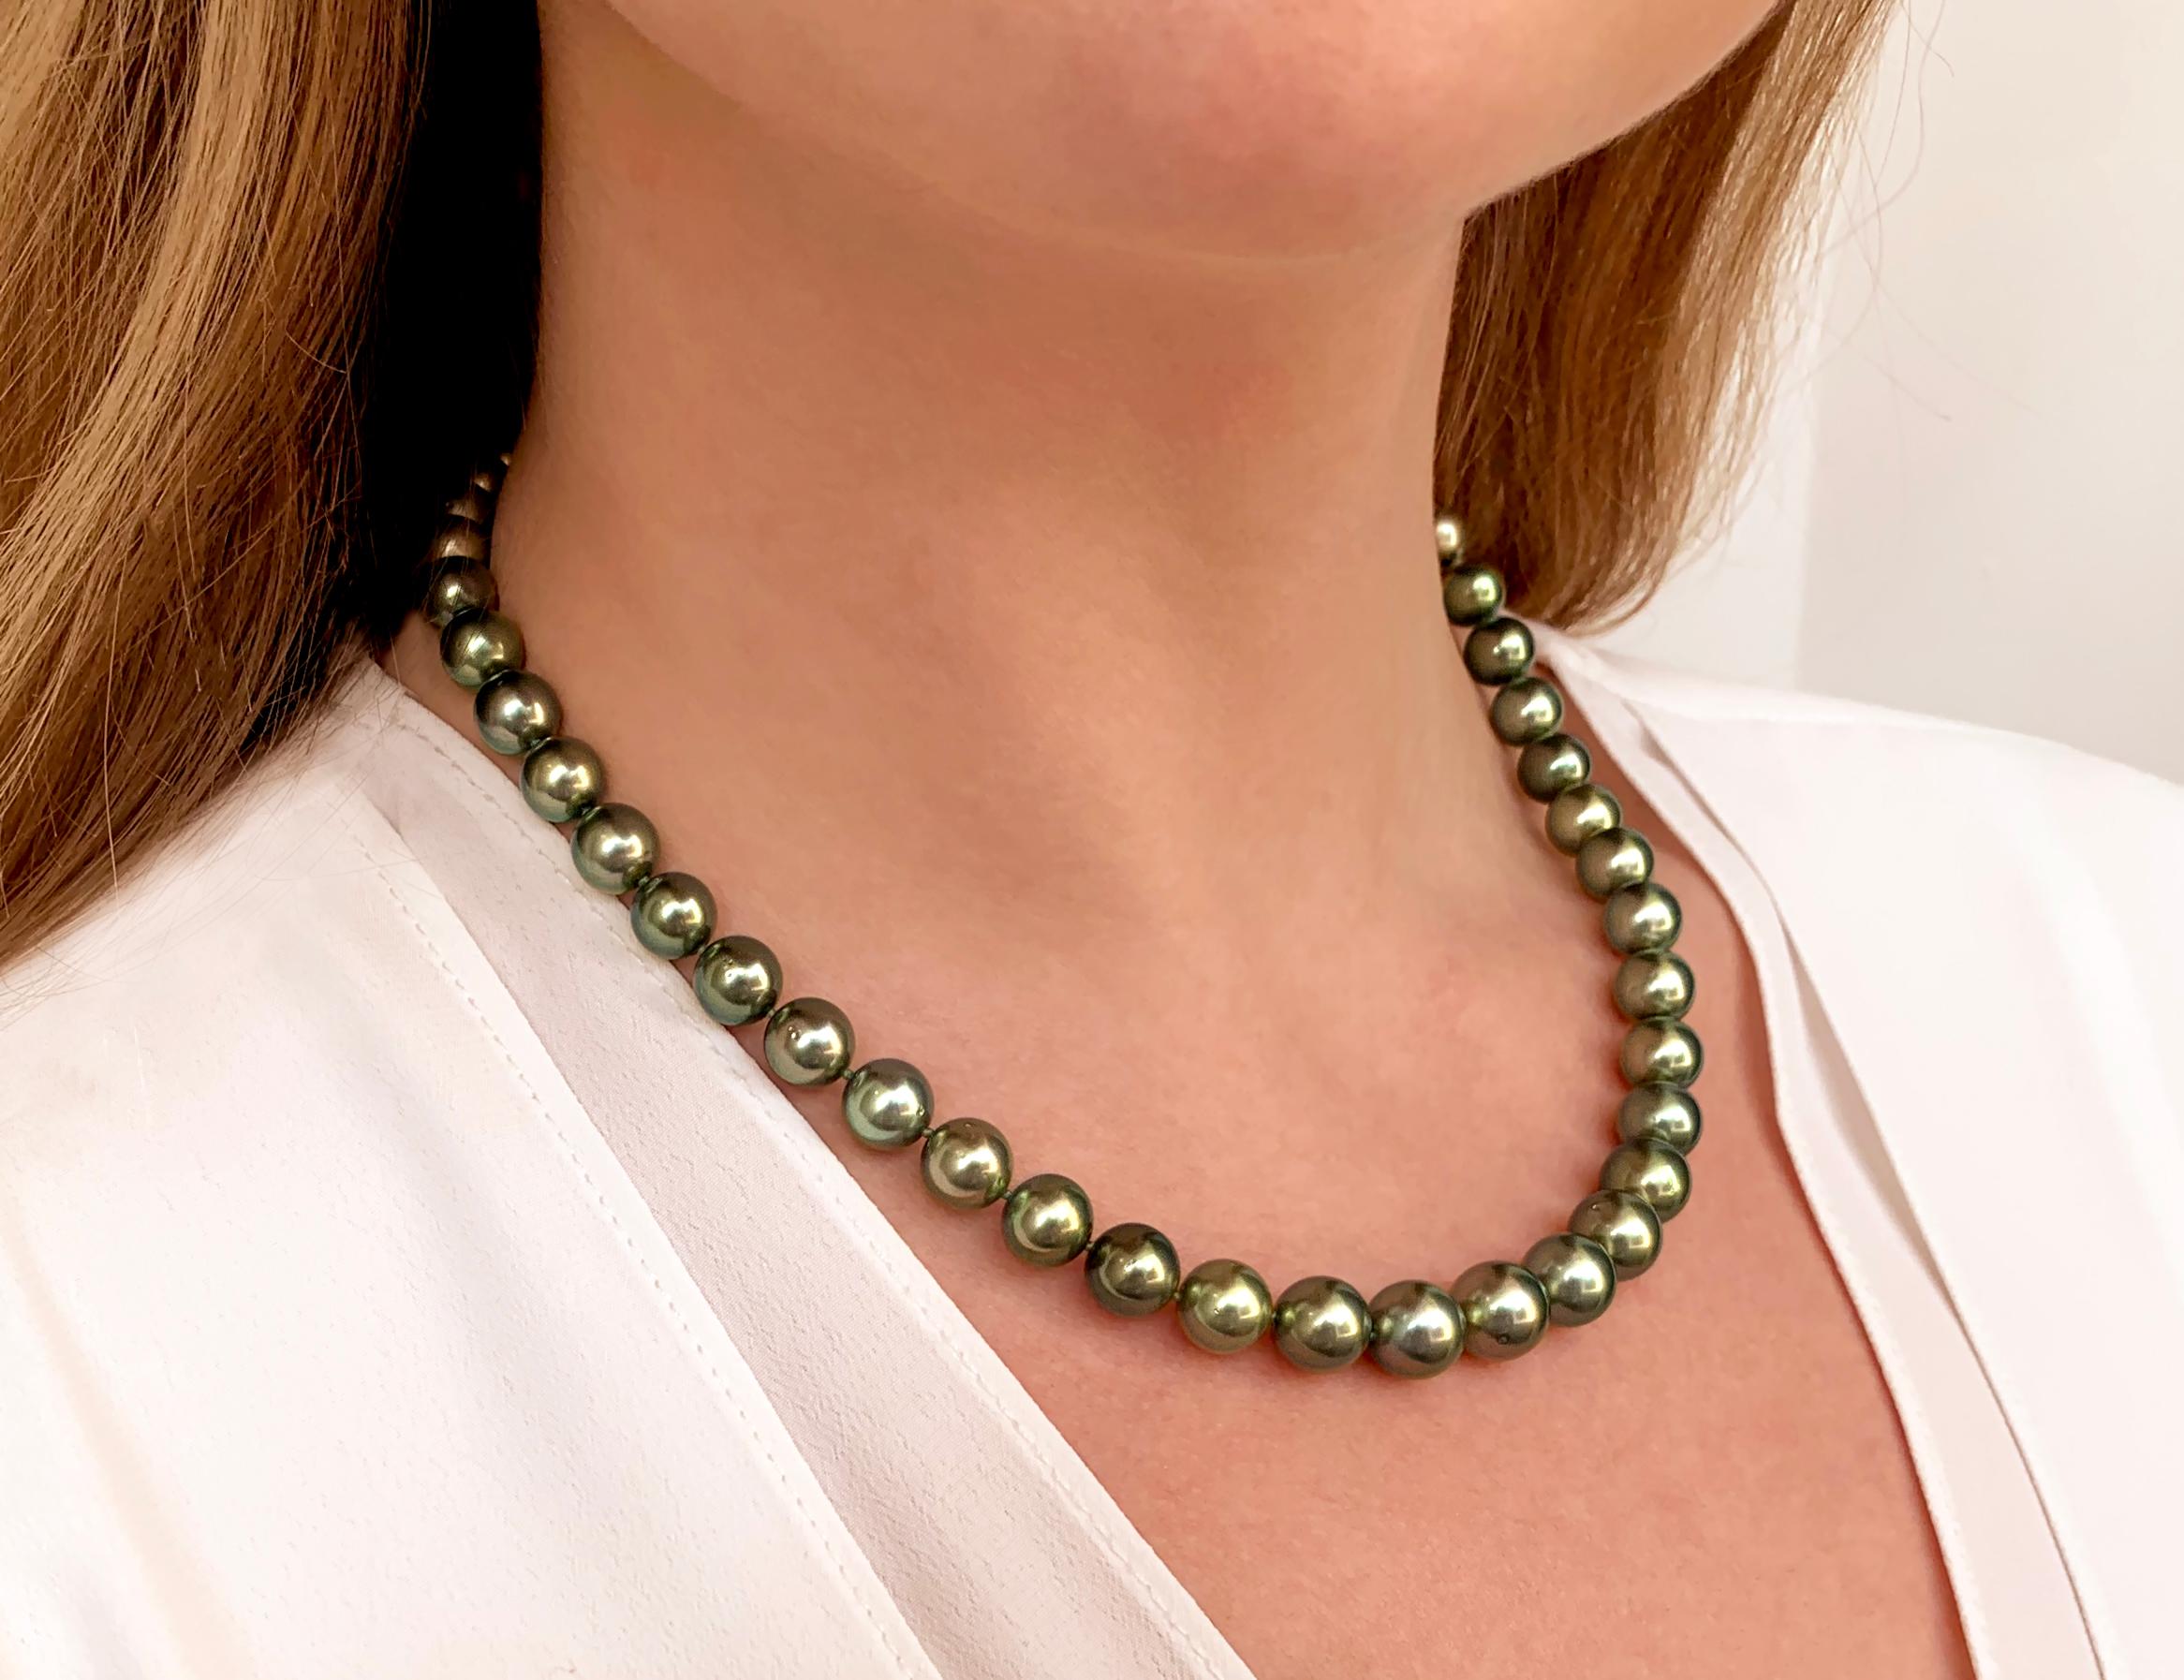 This spectacular necklace from Yoko London features a row of lustrous Pistachio-Coloured Tahitian Pearls which softly graduate in size from 8 - 10.1mm allowing the necklace to sit elegantly upon its wearer’s neck. Completed with an 18 Karat White